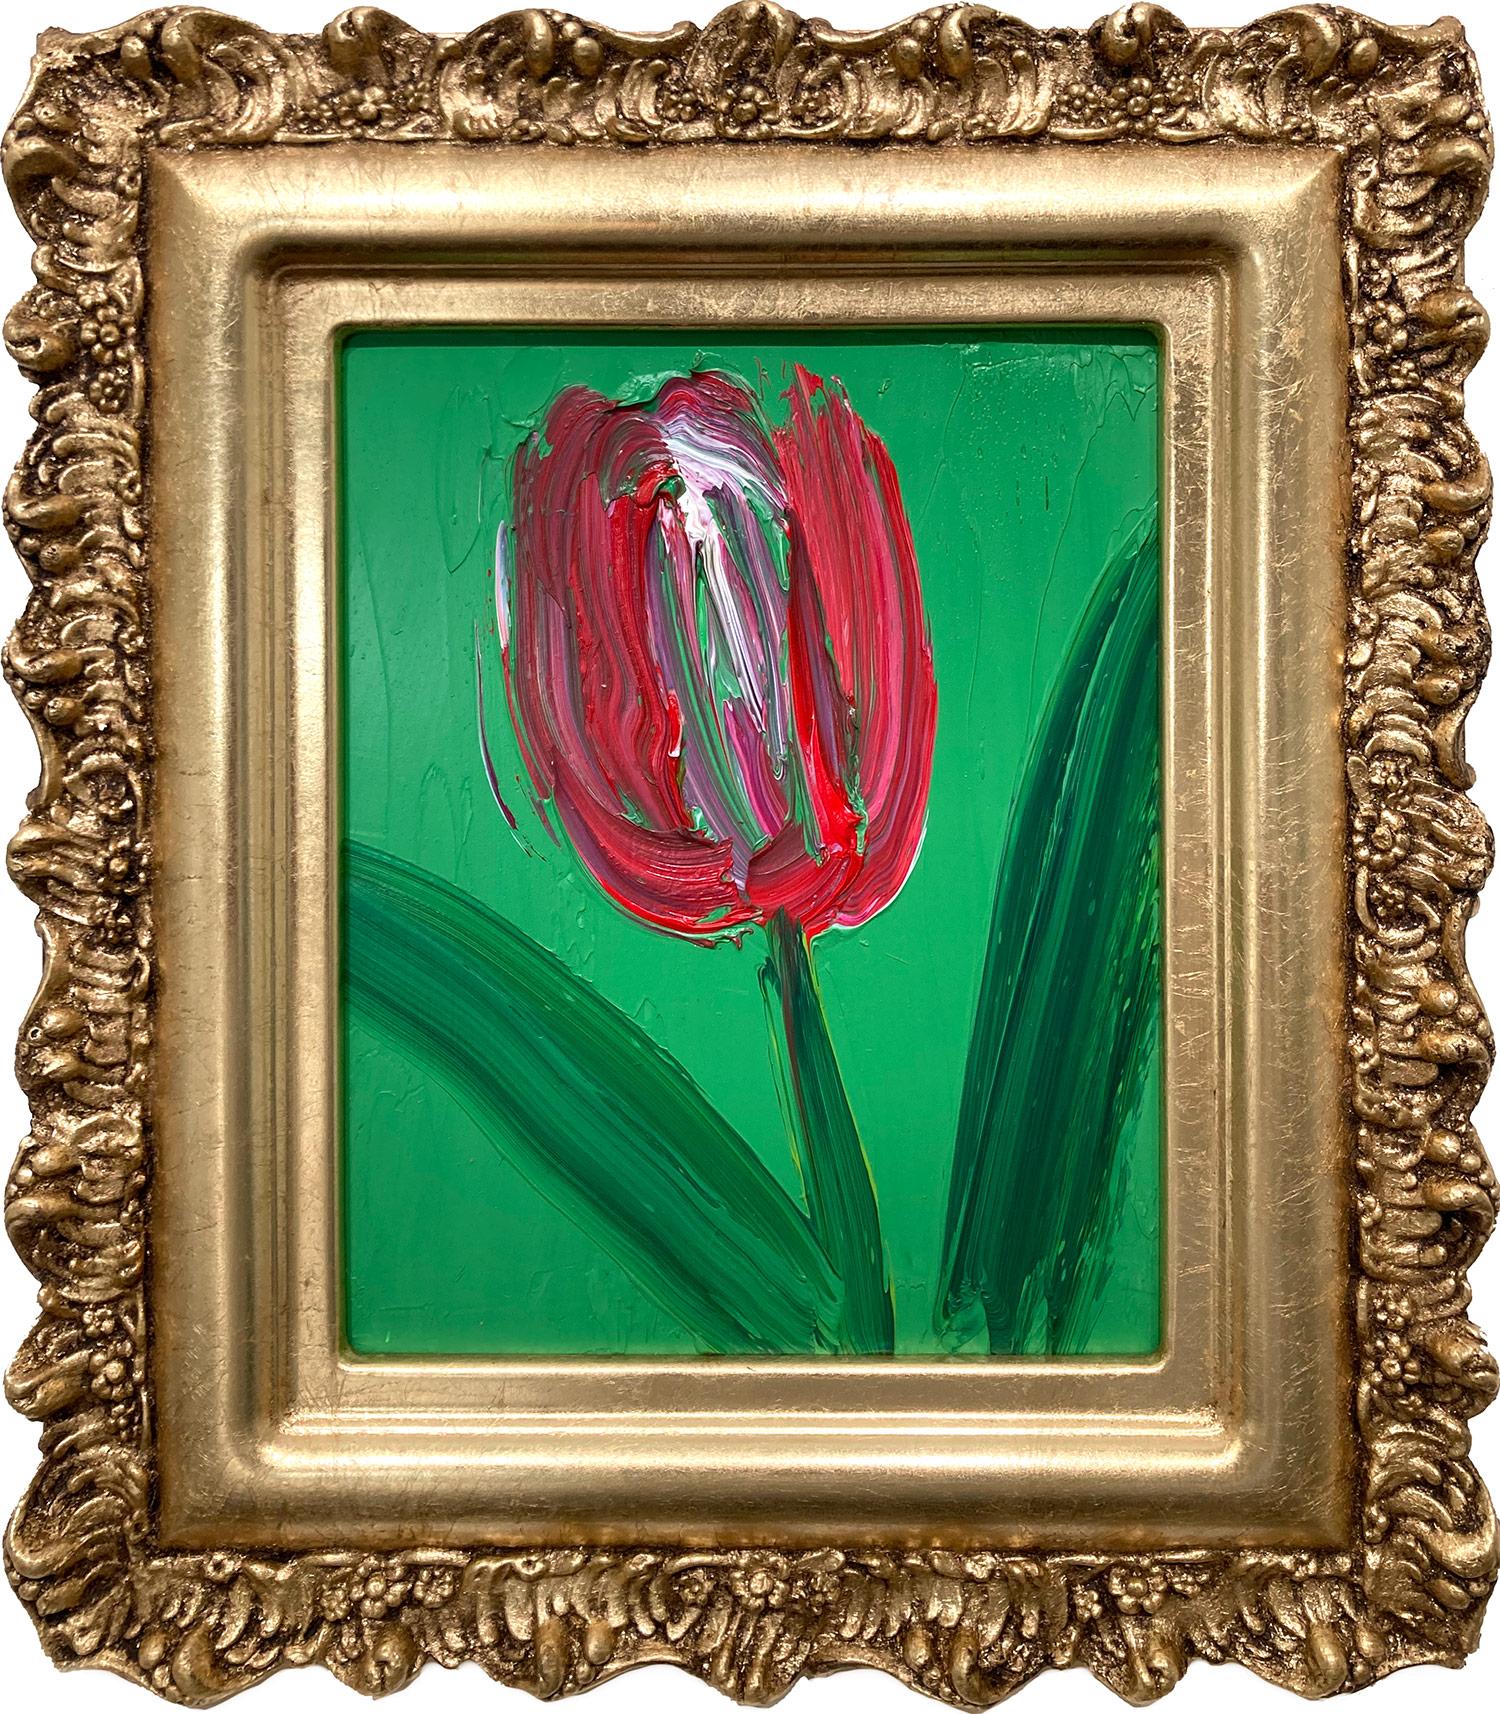 Hunt Slonem Abstract Painting - "Untitled" Red and White Tulip on Forest Green Background Oil Painting Framed